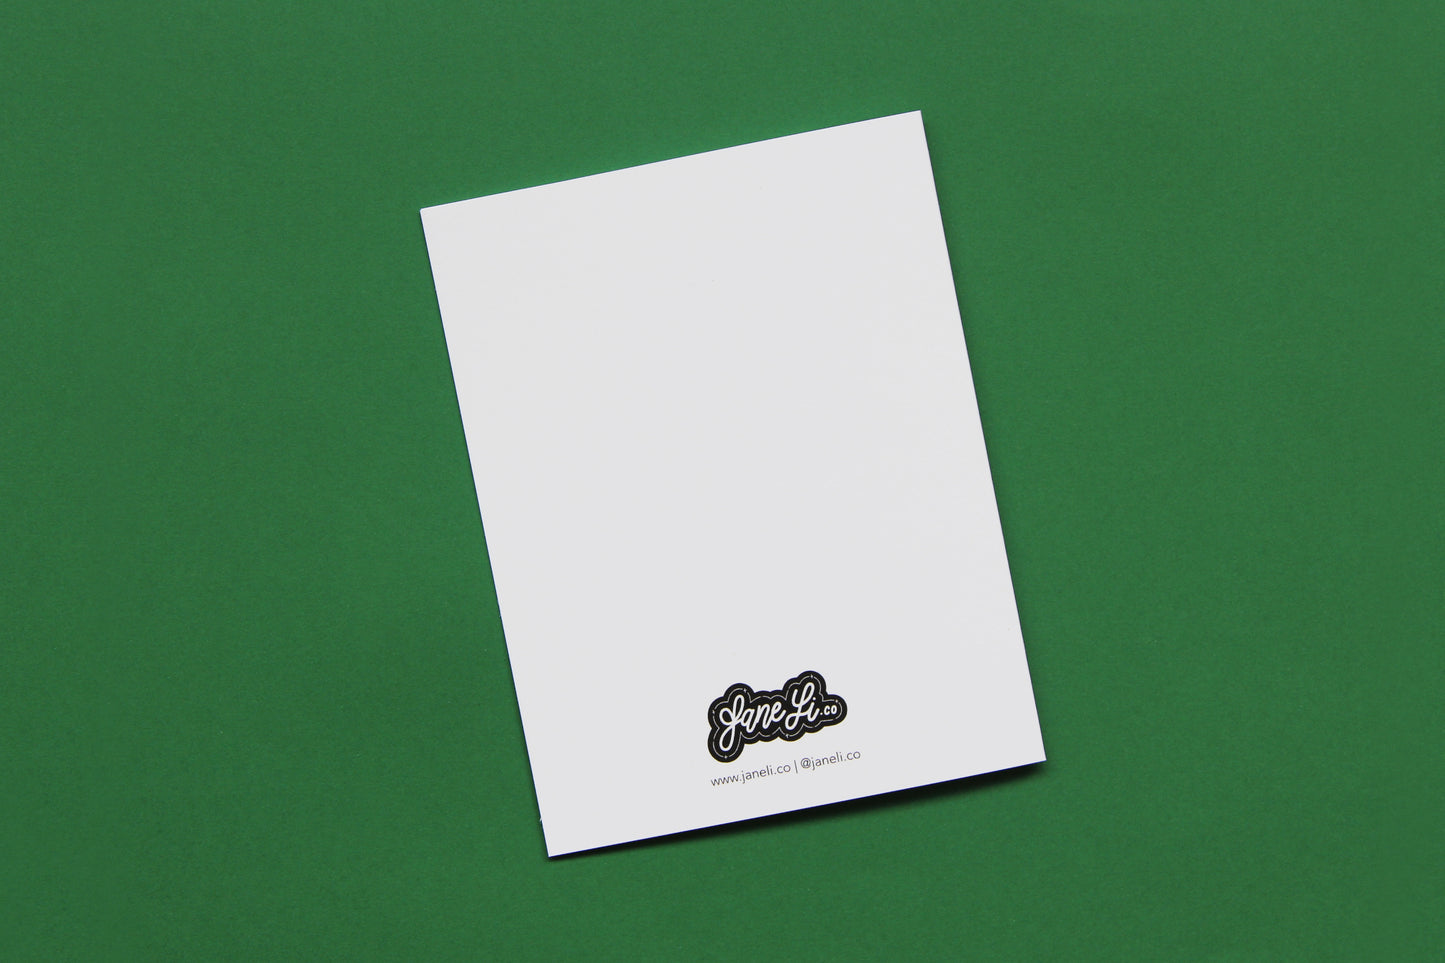 A photo of the blank back of a greeting card on a green background.